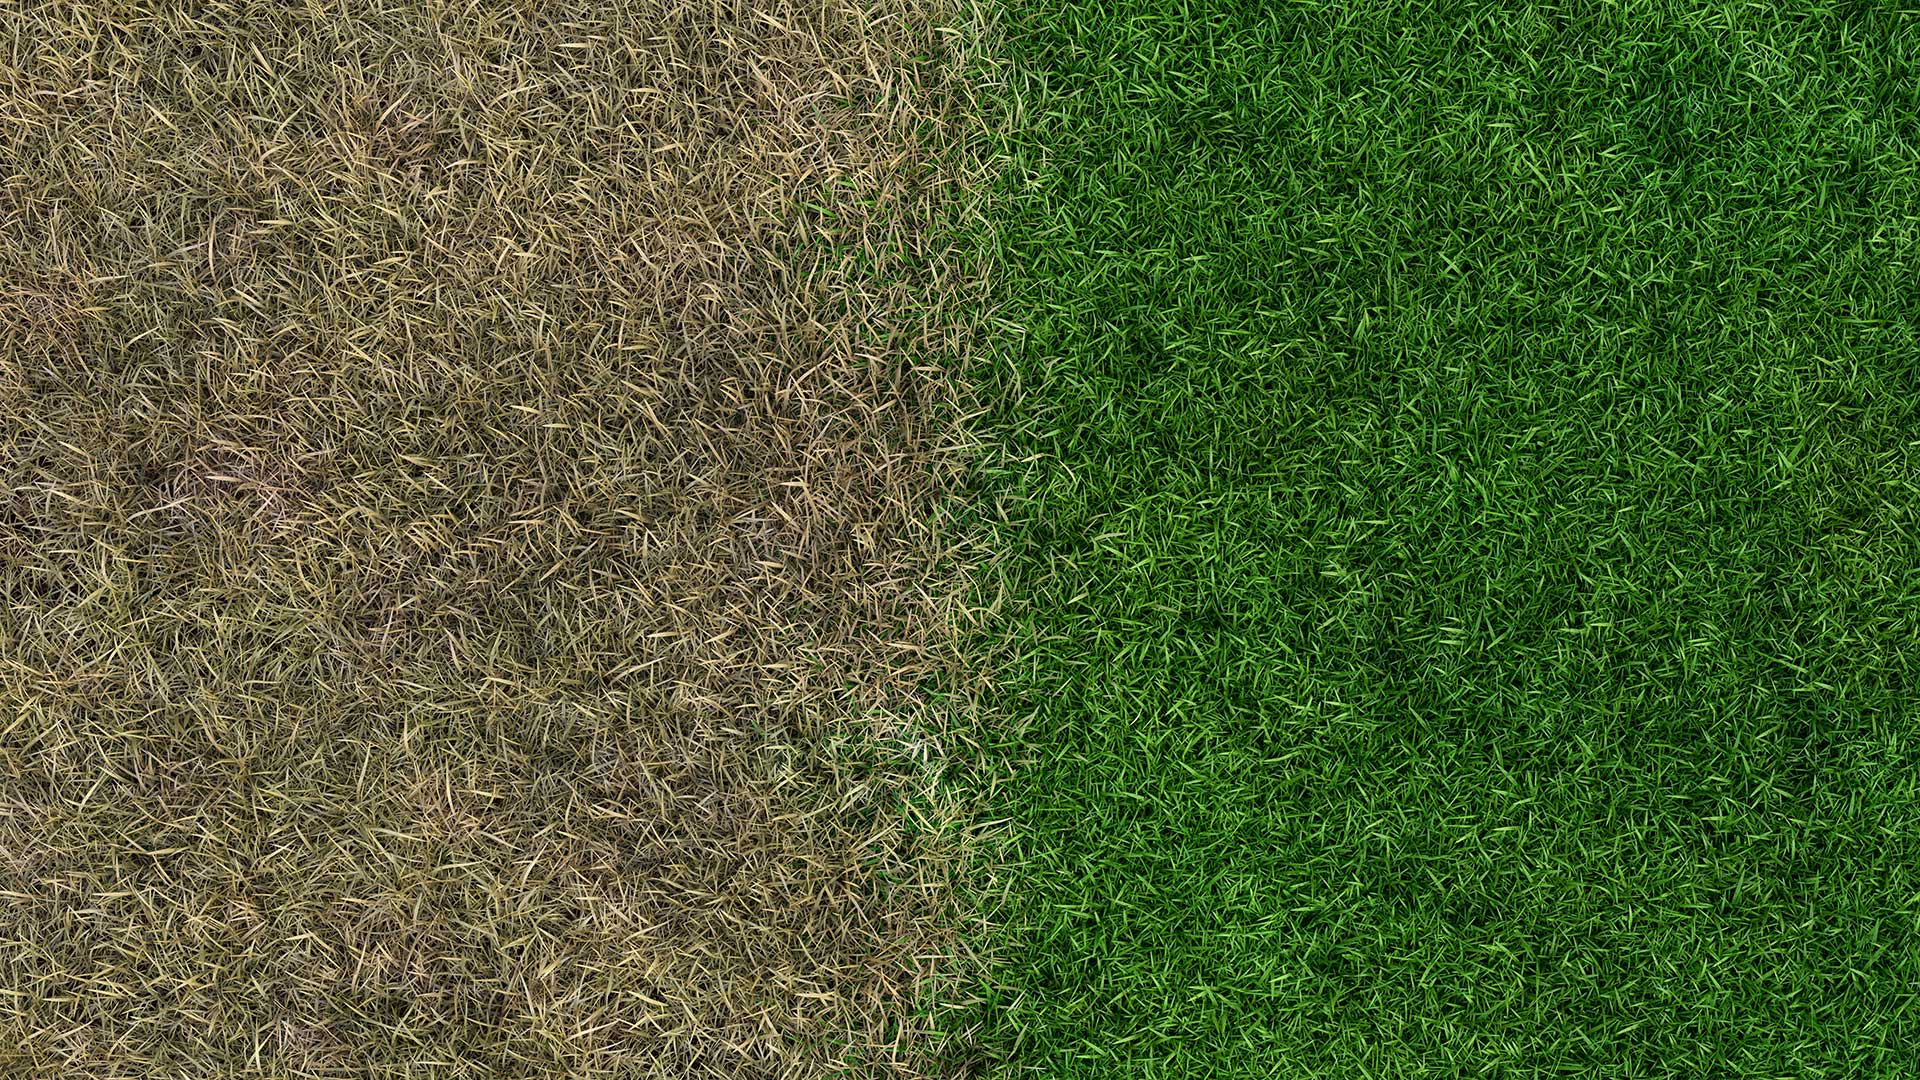 a side-by-side comparison between a healthy lawn and an unhealthy lawn.